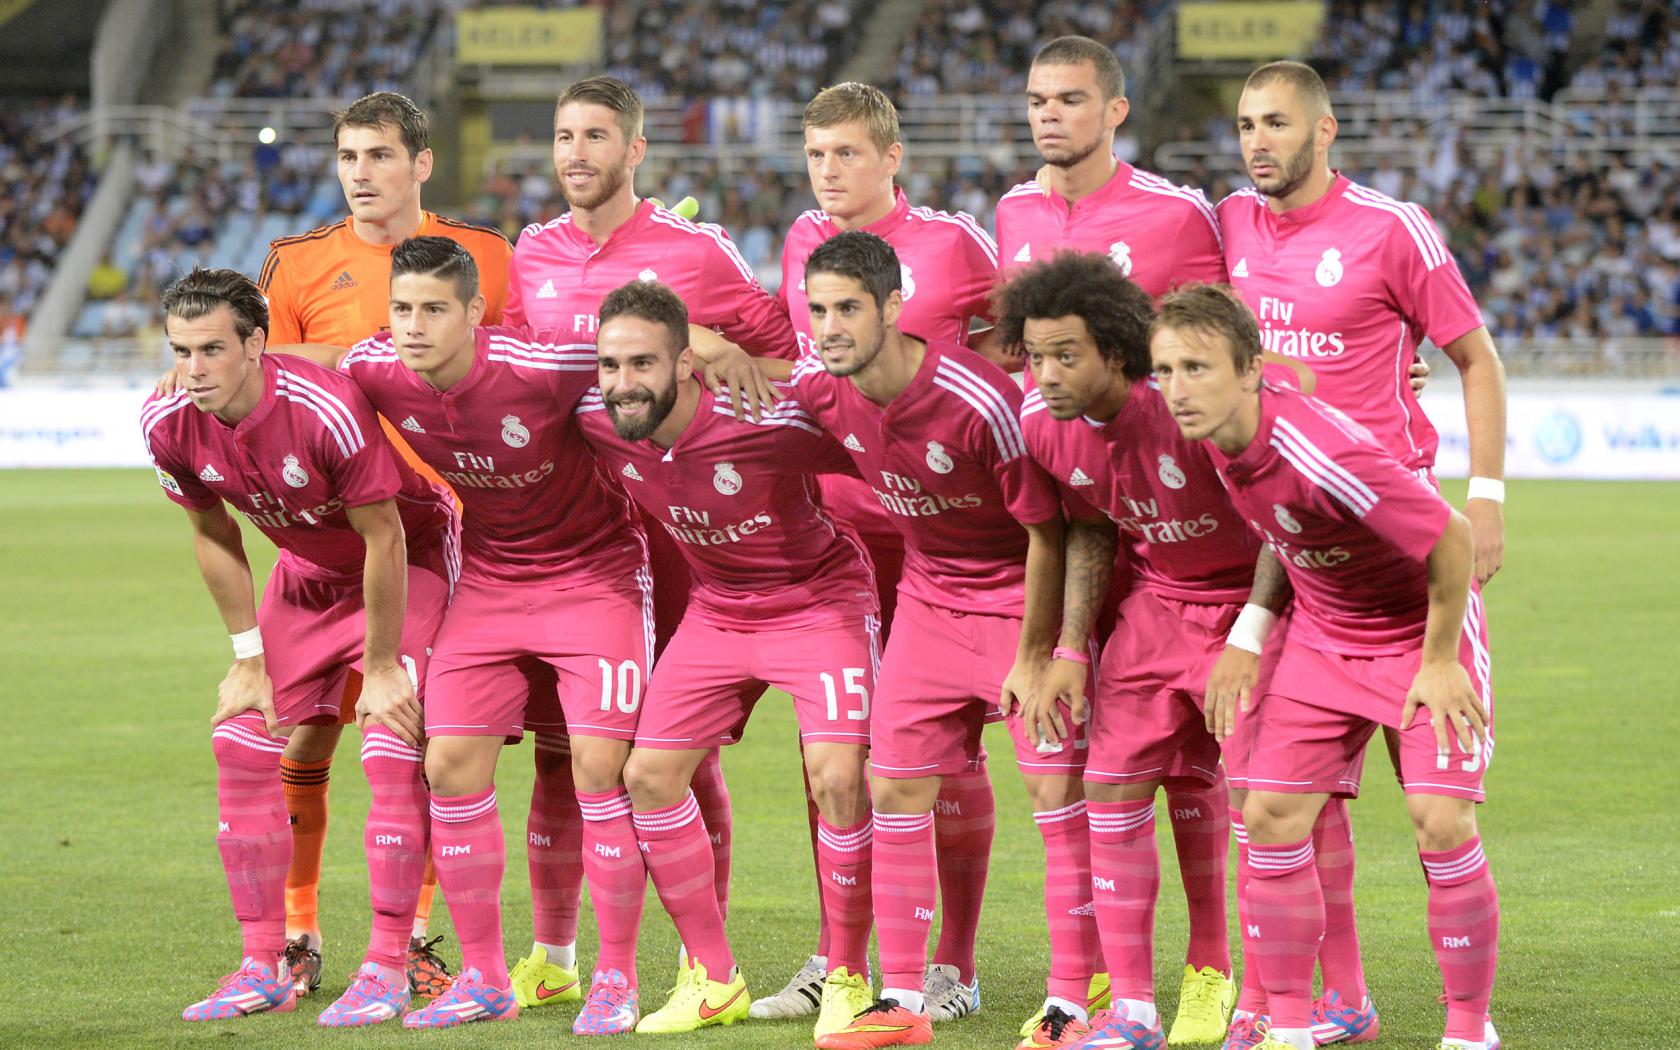 Real Madrid Pictures Squad Full Team Wallpaper In Pink Jersey